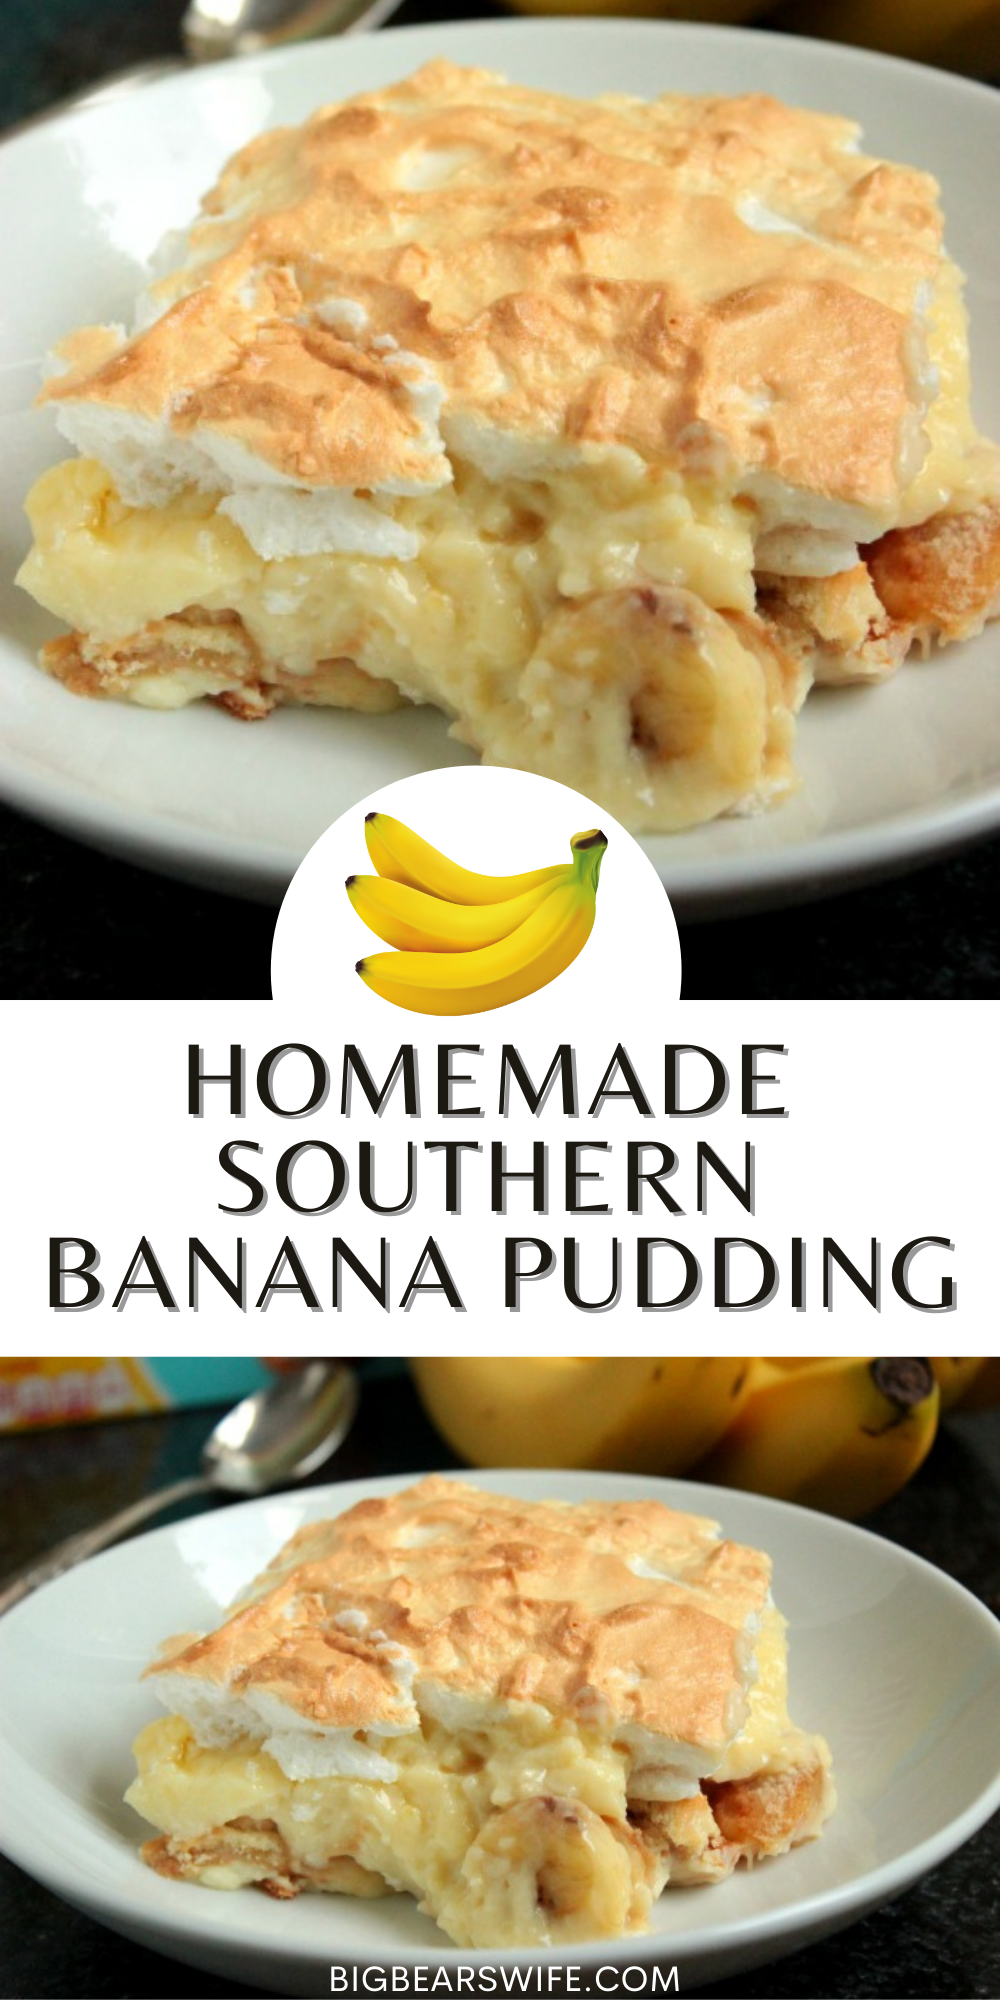 Serve is hot or cold, this Homemade Southern Banana Pudding is going to be loved by all! Roasting the banana gives it a richer banana flavor too! via @bigbearswife